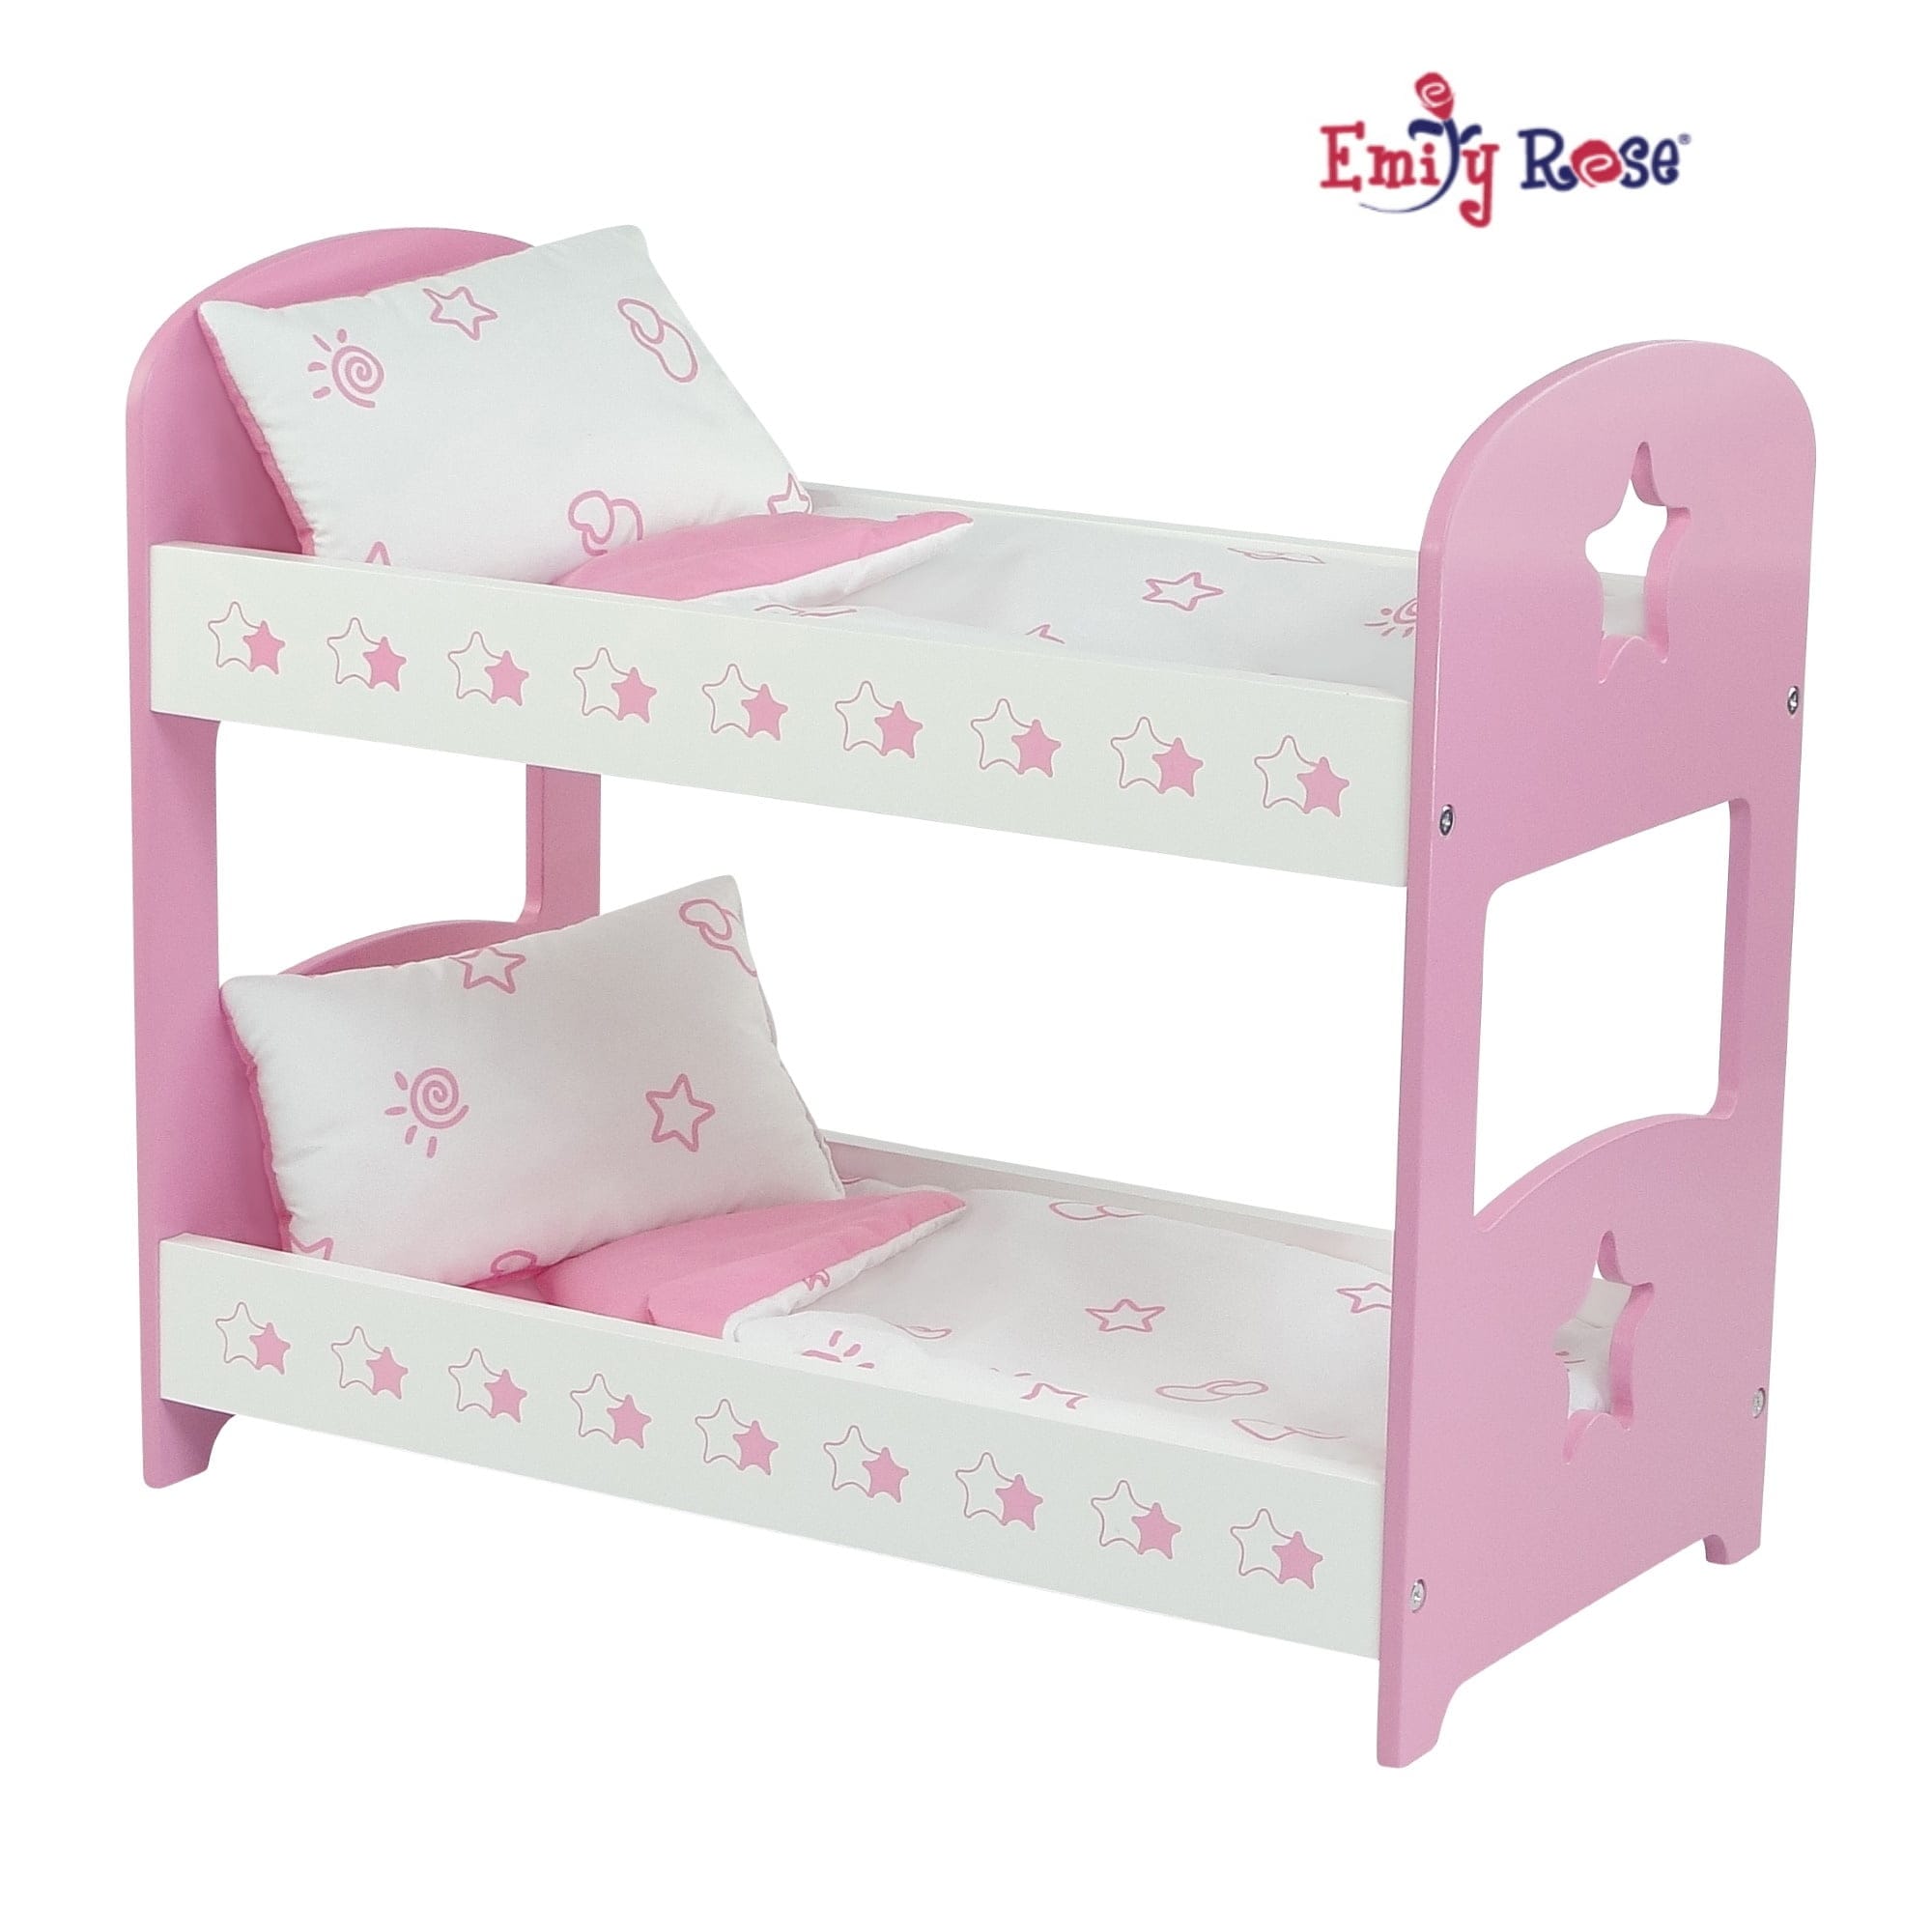 18 Inch Doll Bunk Bed Furniture - Star, 18 Doll Bed Includes 2 Sets of  Reversible Doll Bedding